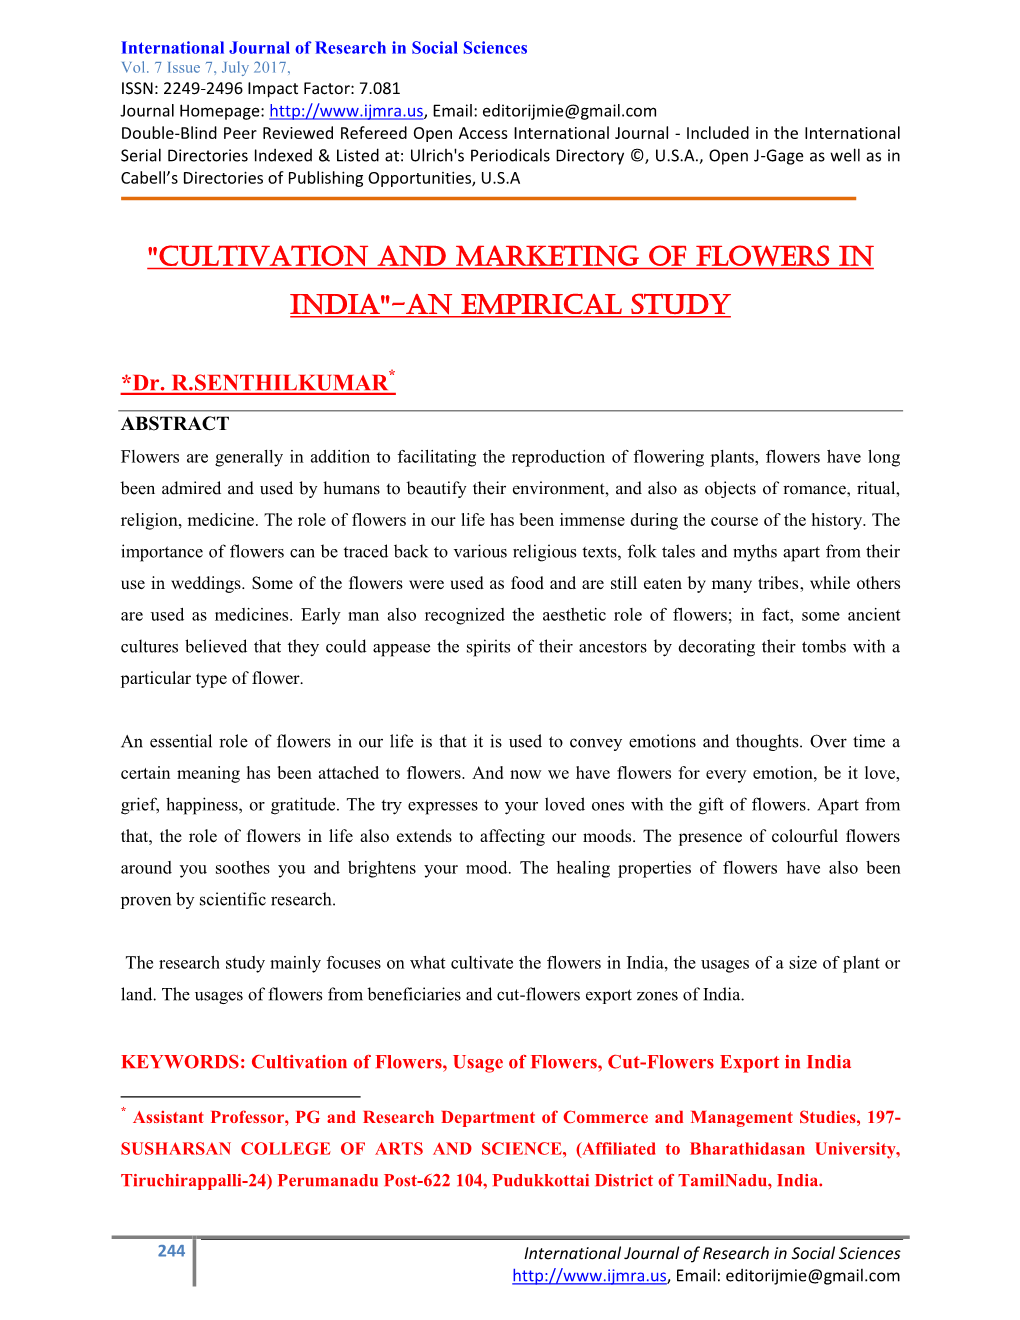 "CULTIVATION and MARKETING of FLOWERS in INDIA"-An Empirical Study